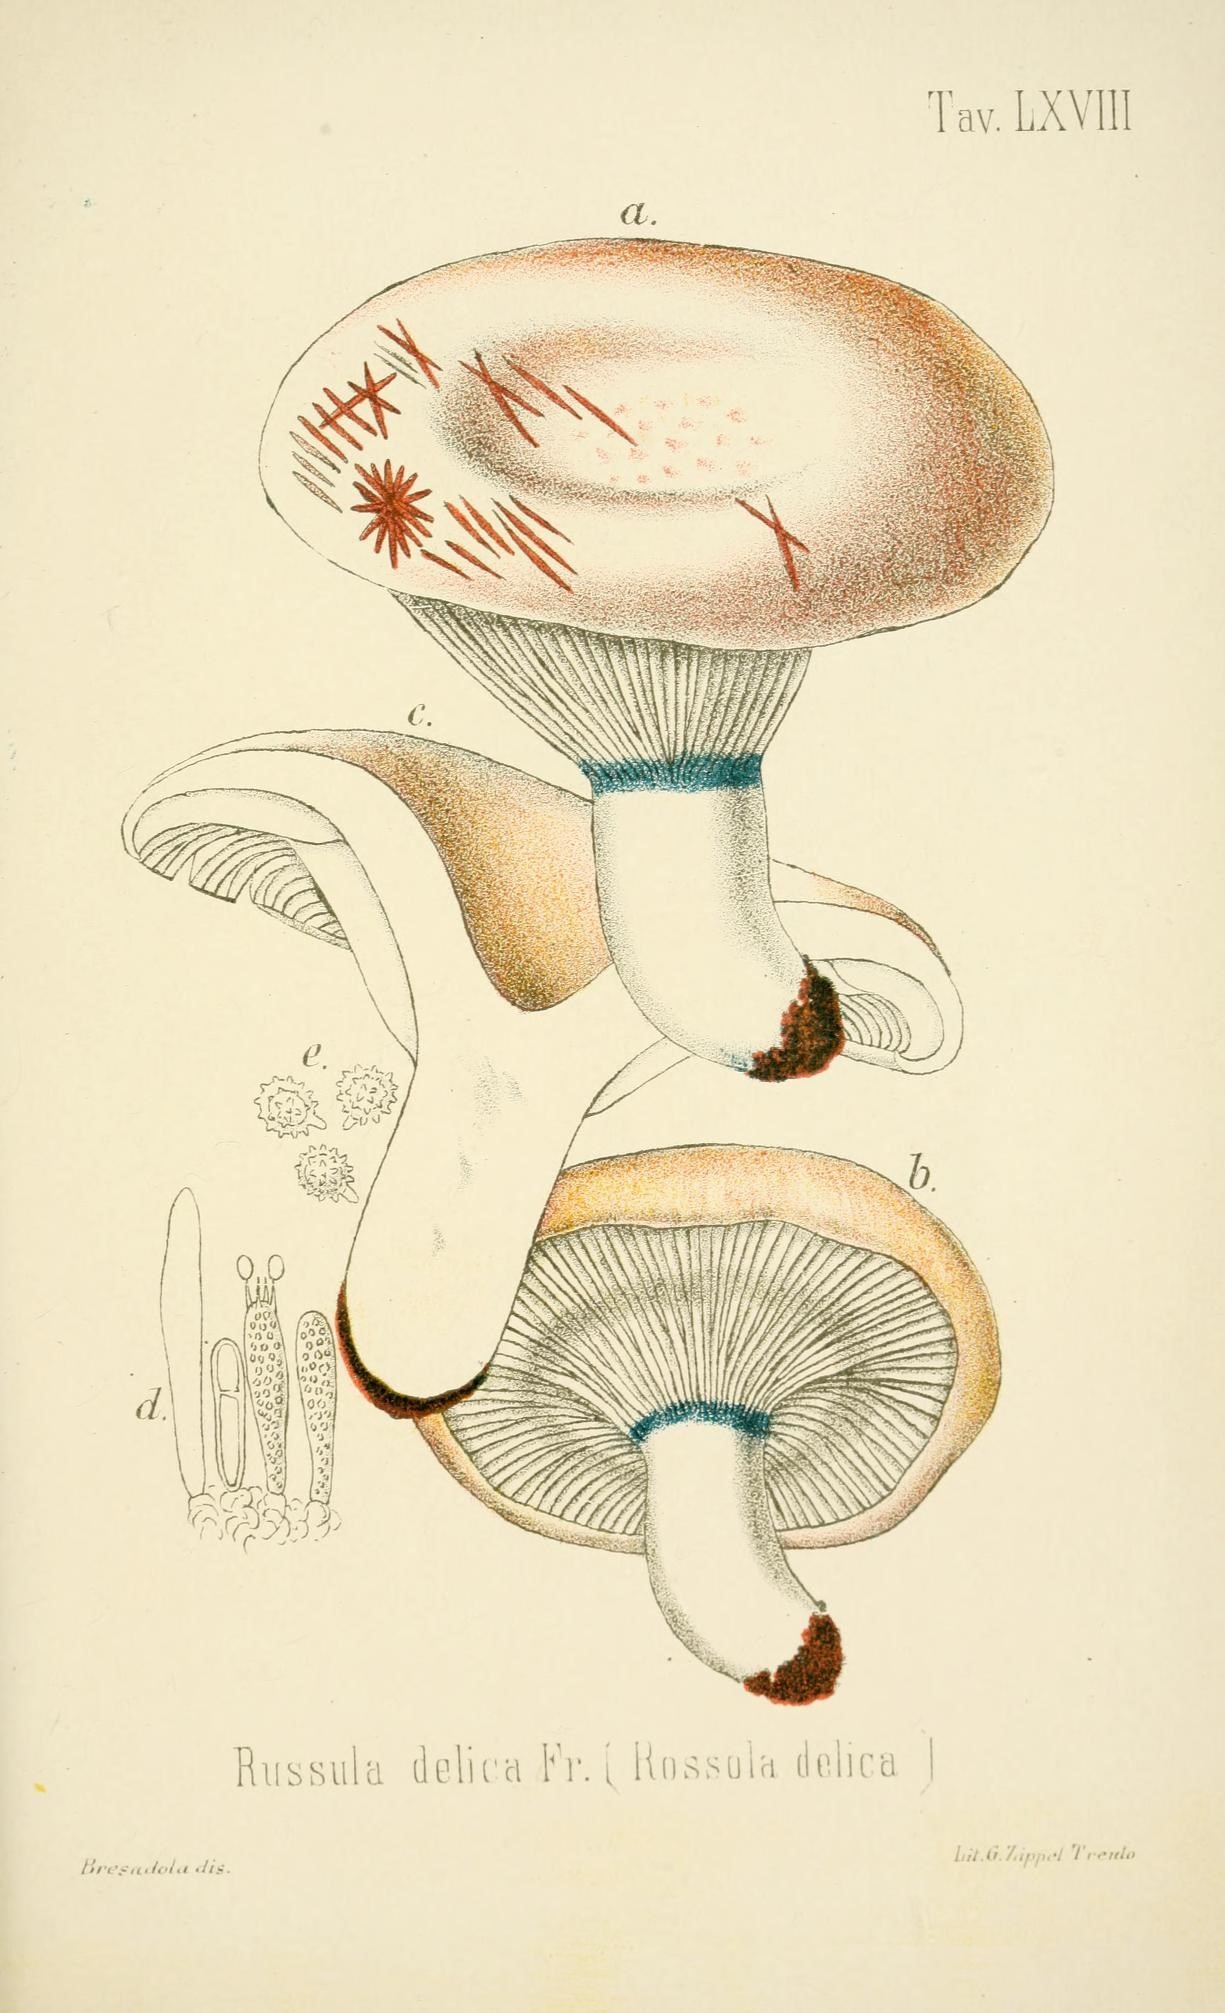 this is an image of an illustration of mushrooms